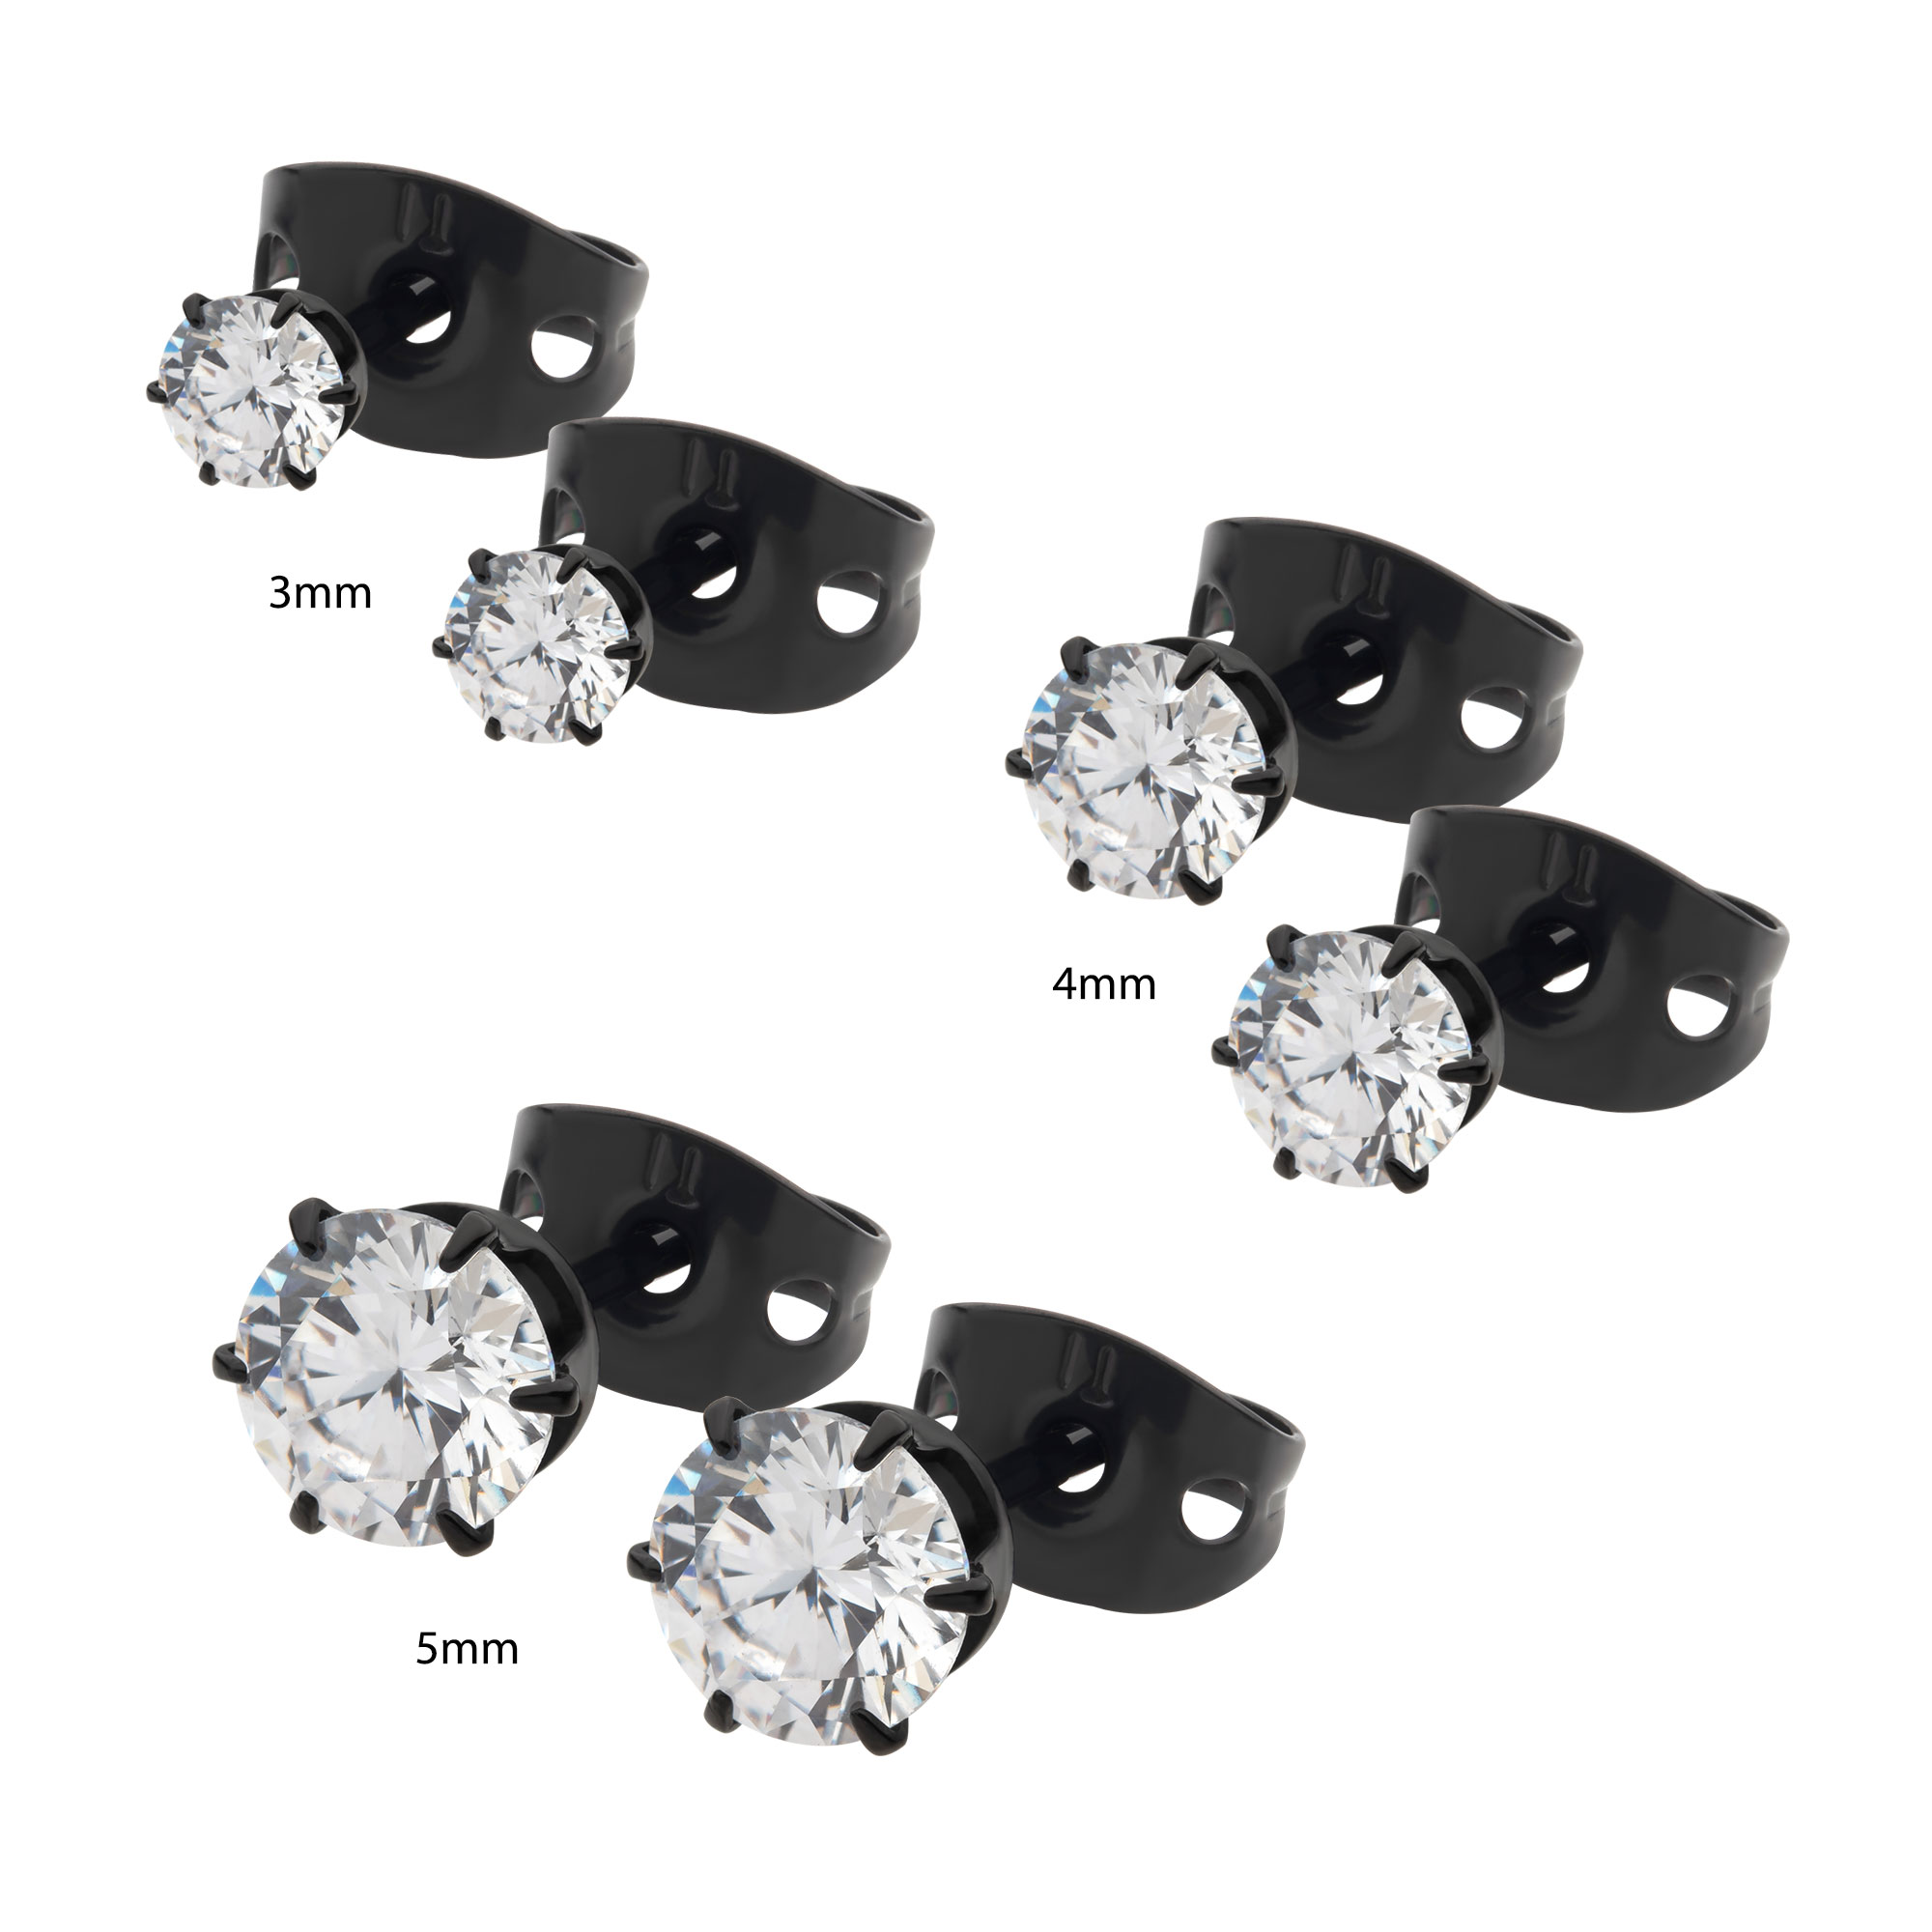 20g Black Plated Titanium Post and Butterfly Back with 6-Prong Set CZ Stud Earrings Image 3 P.K. Bennett Jewelers Mundelein, IL